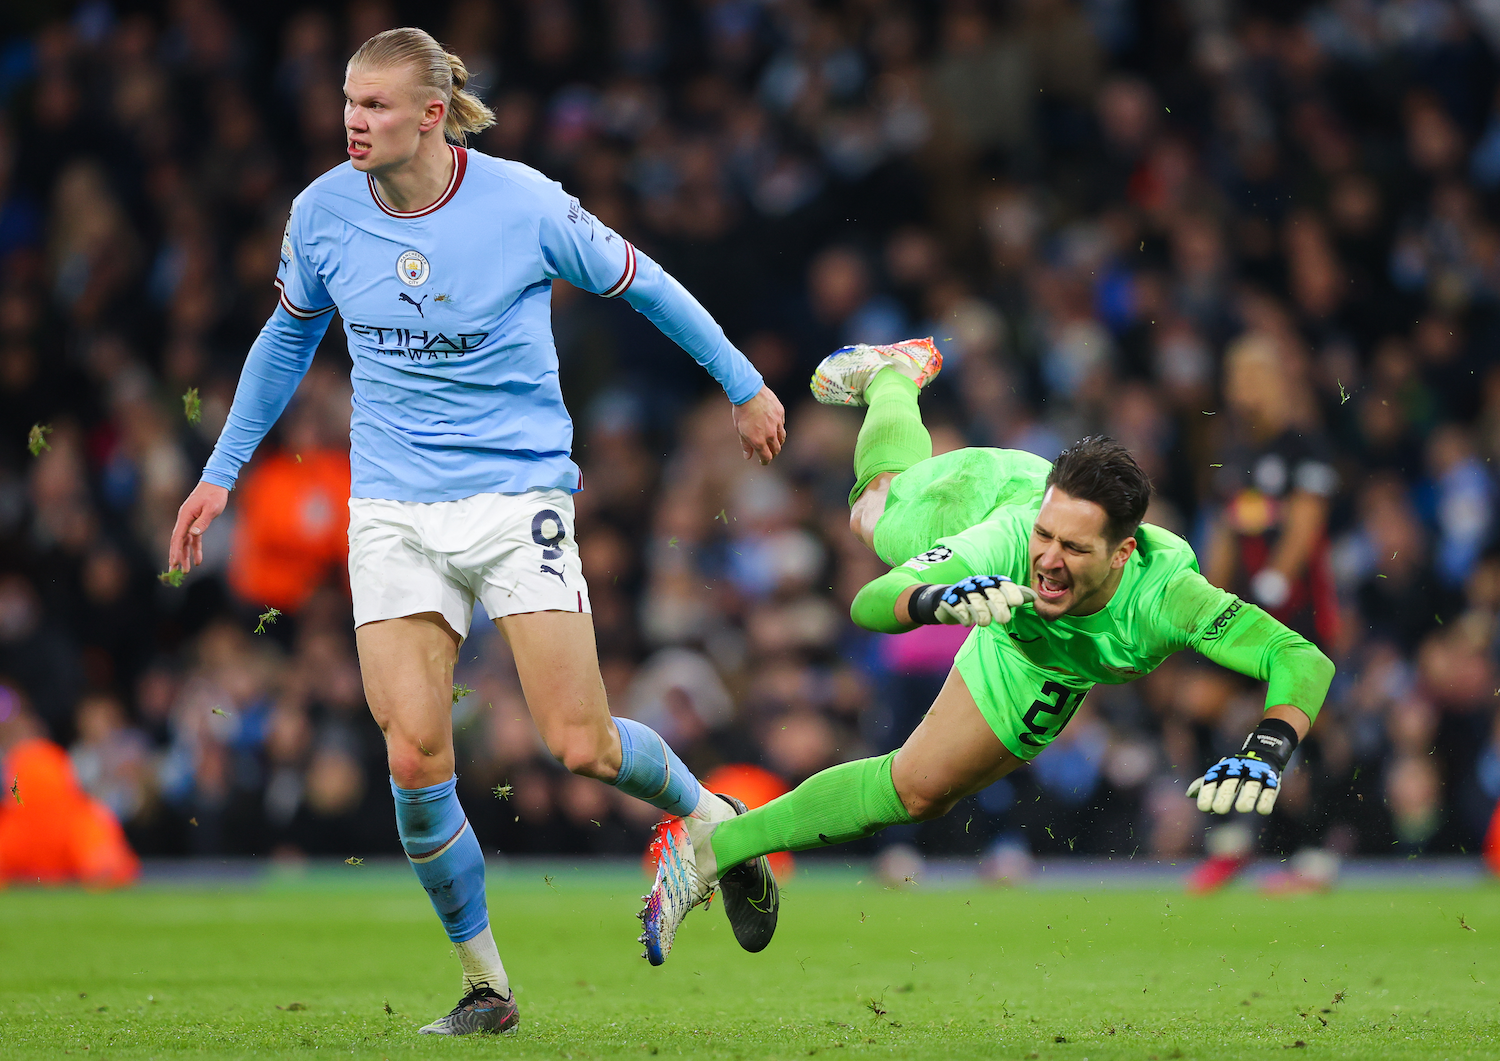 Erling Haaland of Manchester City next to a desperately diving Janis Blaswich of RB Leipzig in Champions League round-of-16